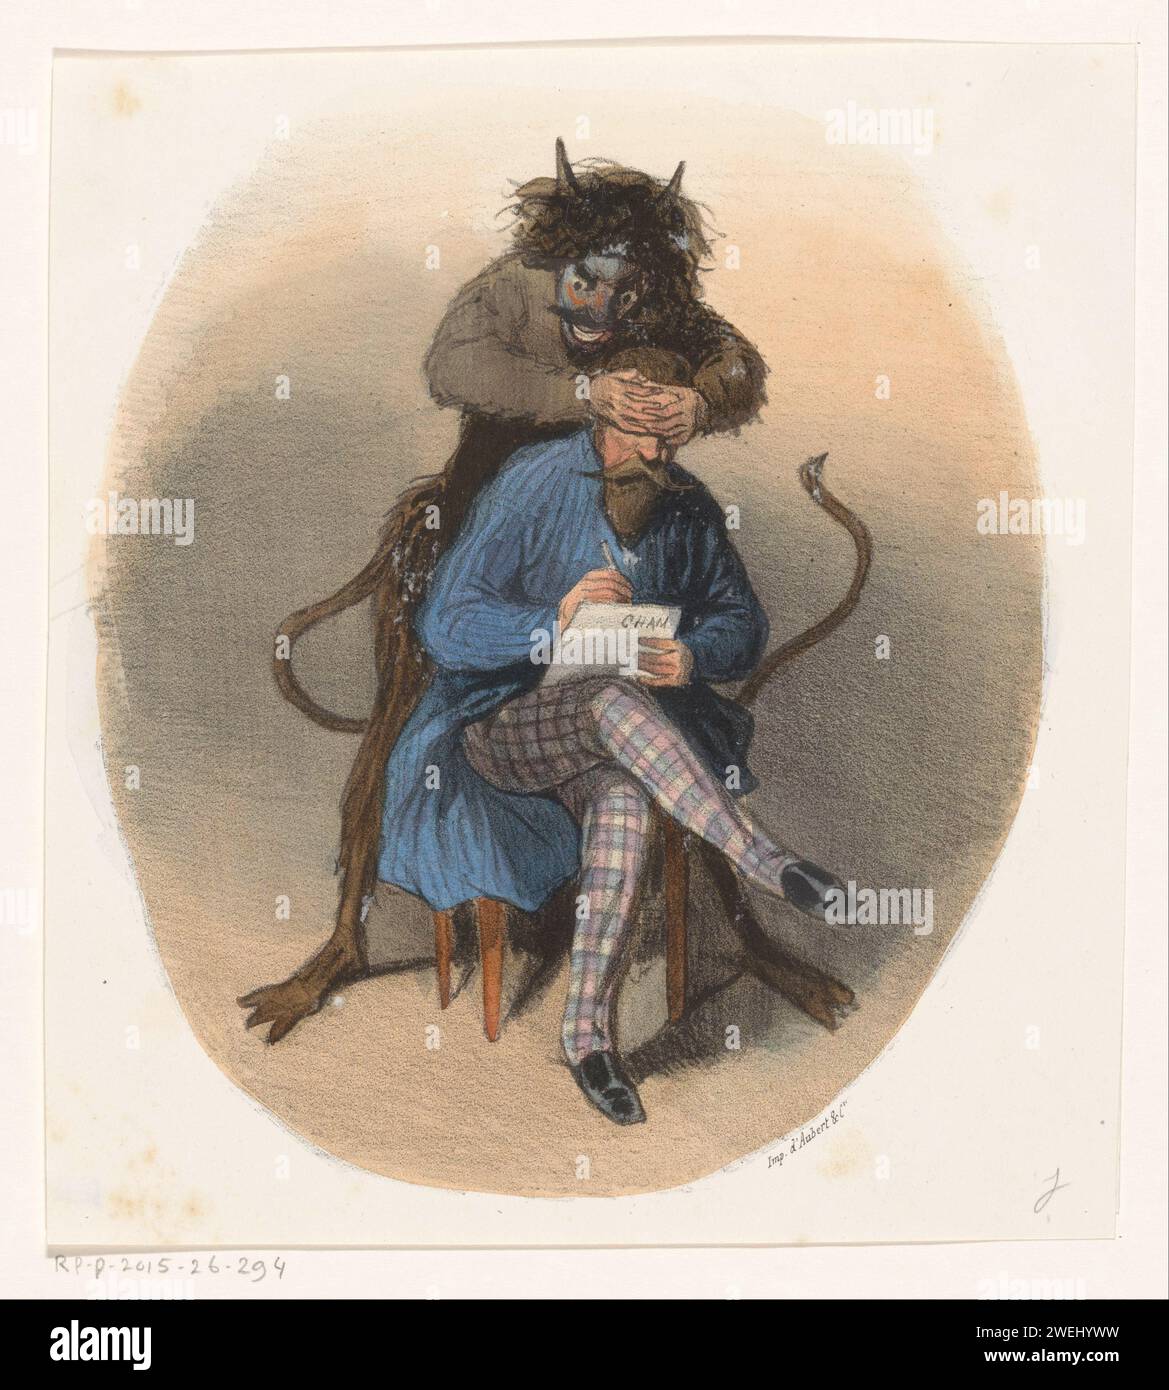 Writer and the devil, 1828 - 1879 print A writer, possibly cham himself, is writing on a chair. Behind him is a devil who has put his hands over his eyes.  paper  author, poet writing. devil(s) and demons Stock Photo